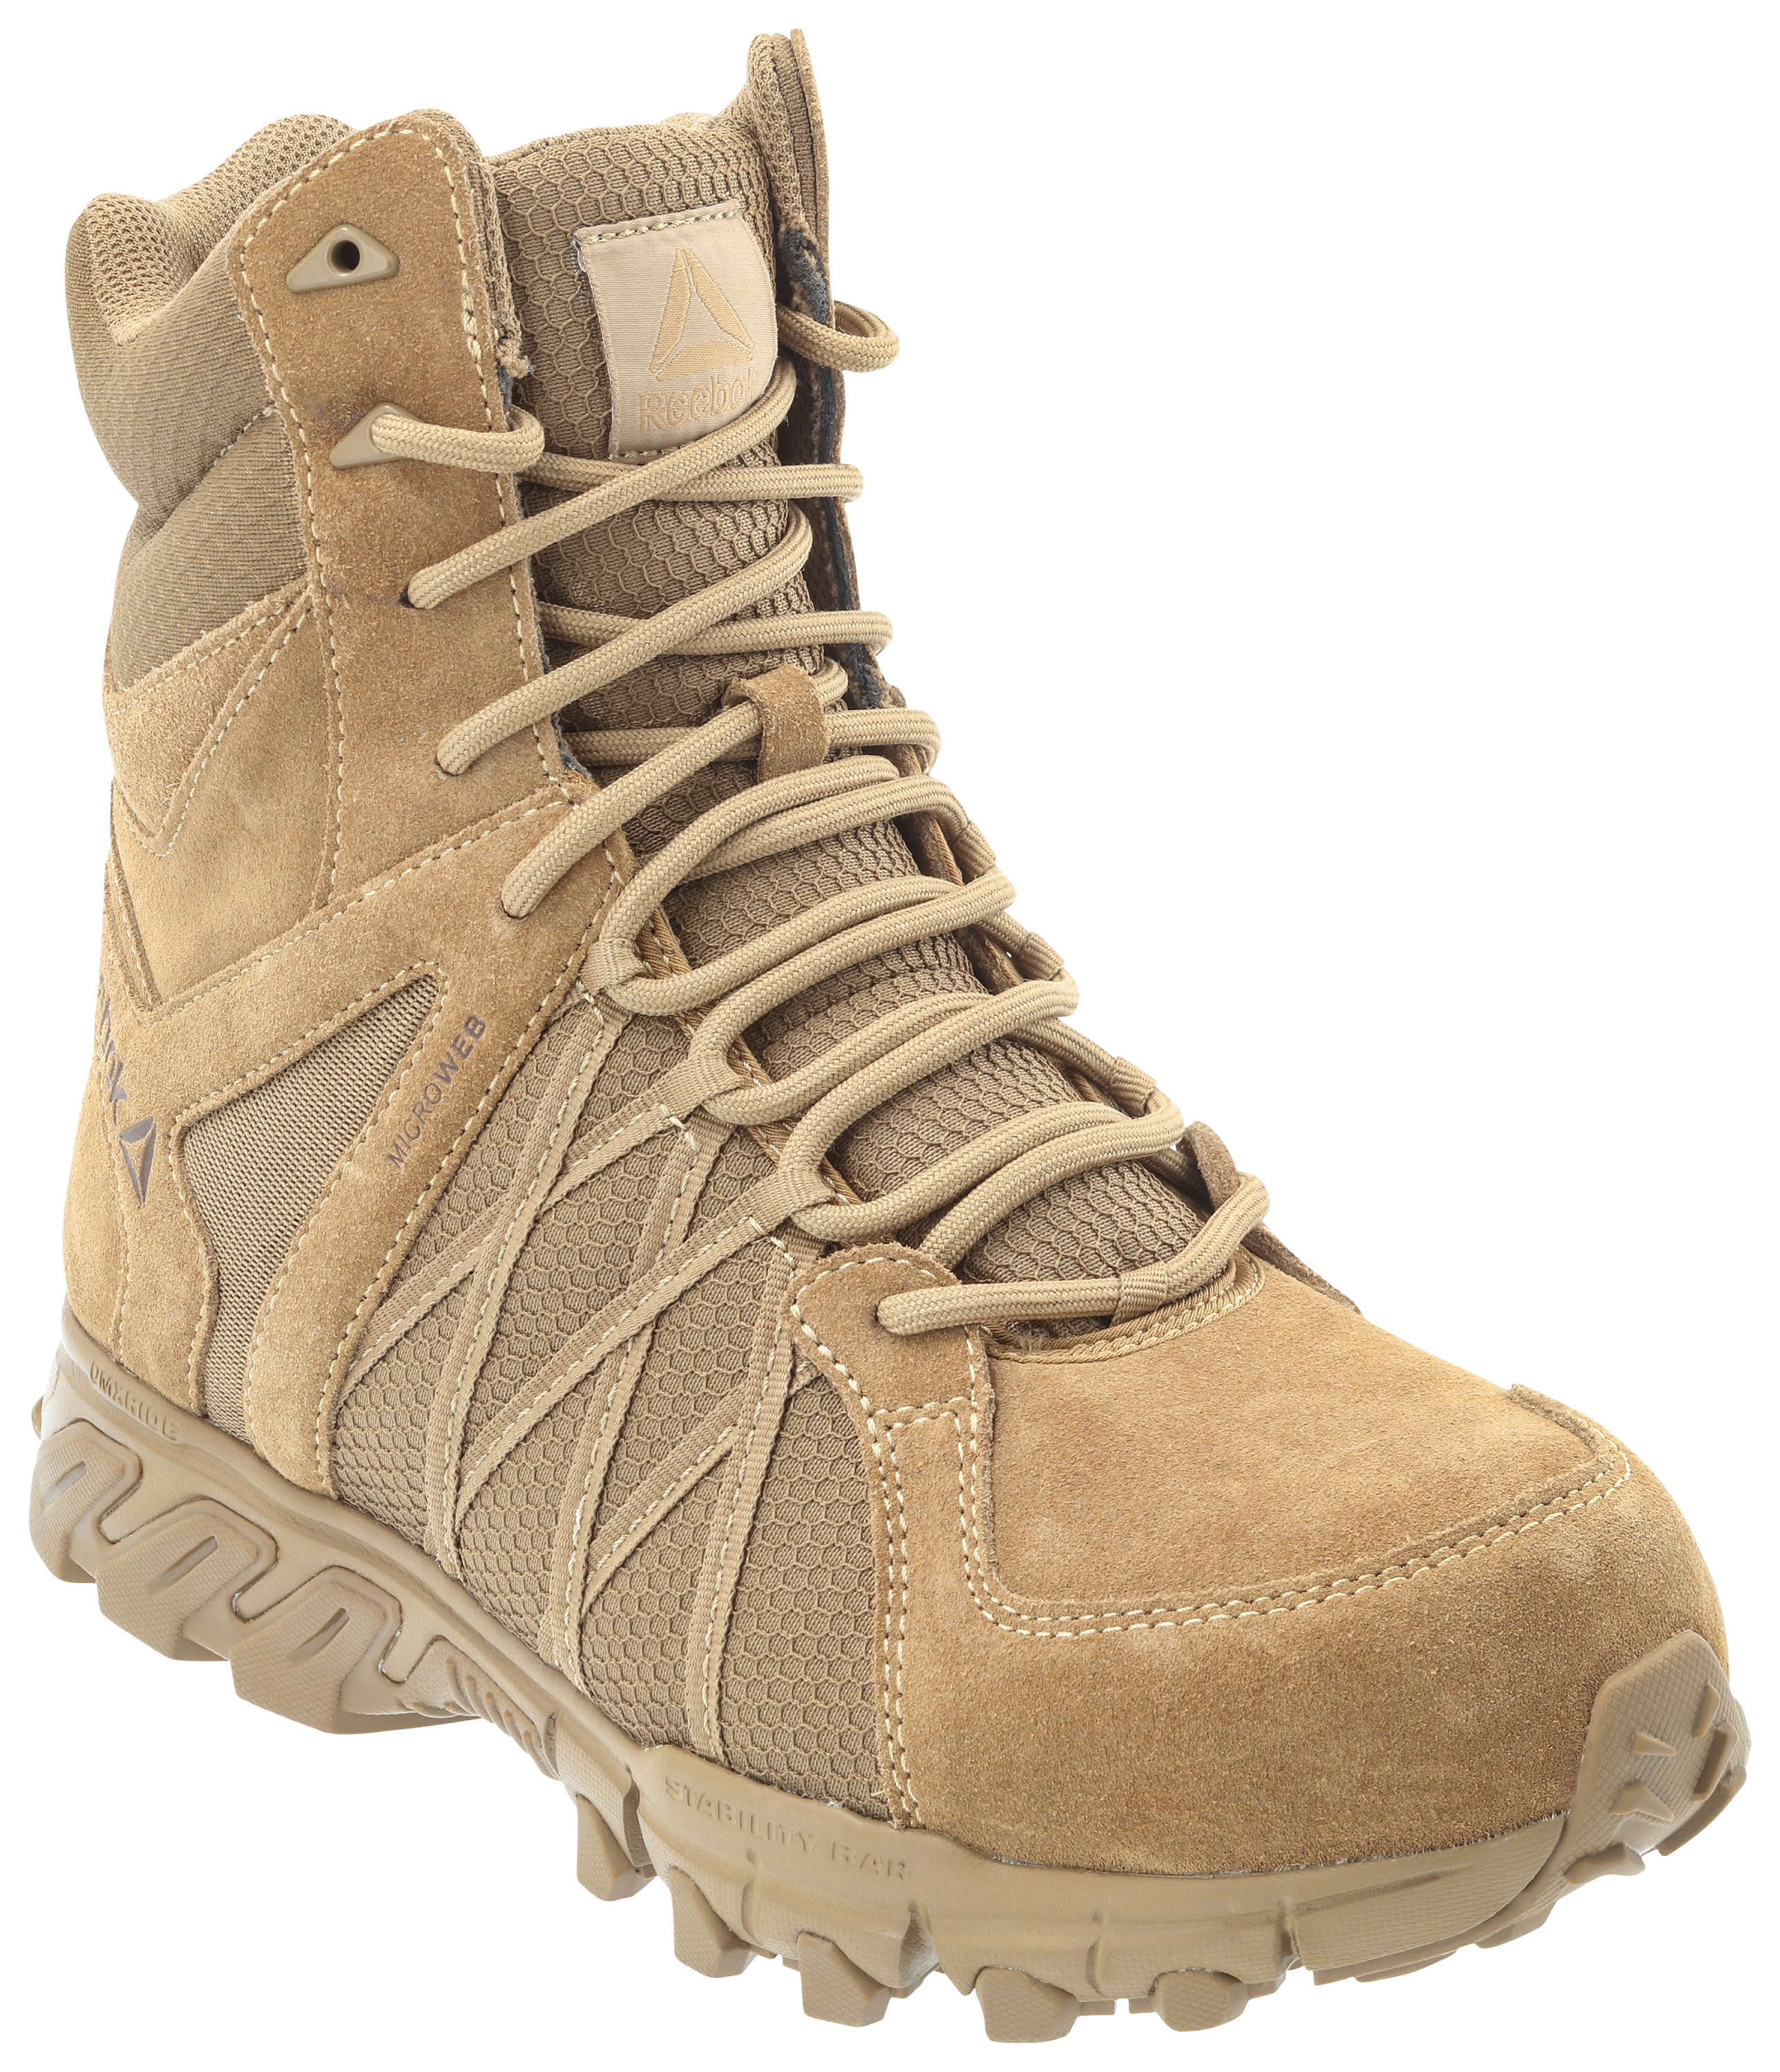 Reebok Trailgrip Tactical Composite Toe Side Zip Work Boots for Men - Coyote Brown - 9.5M